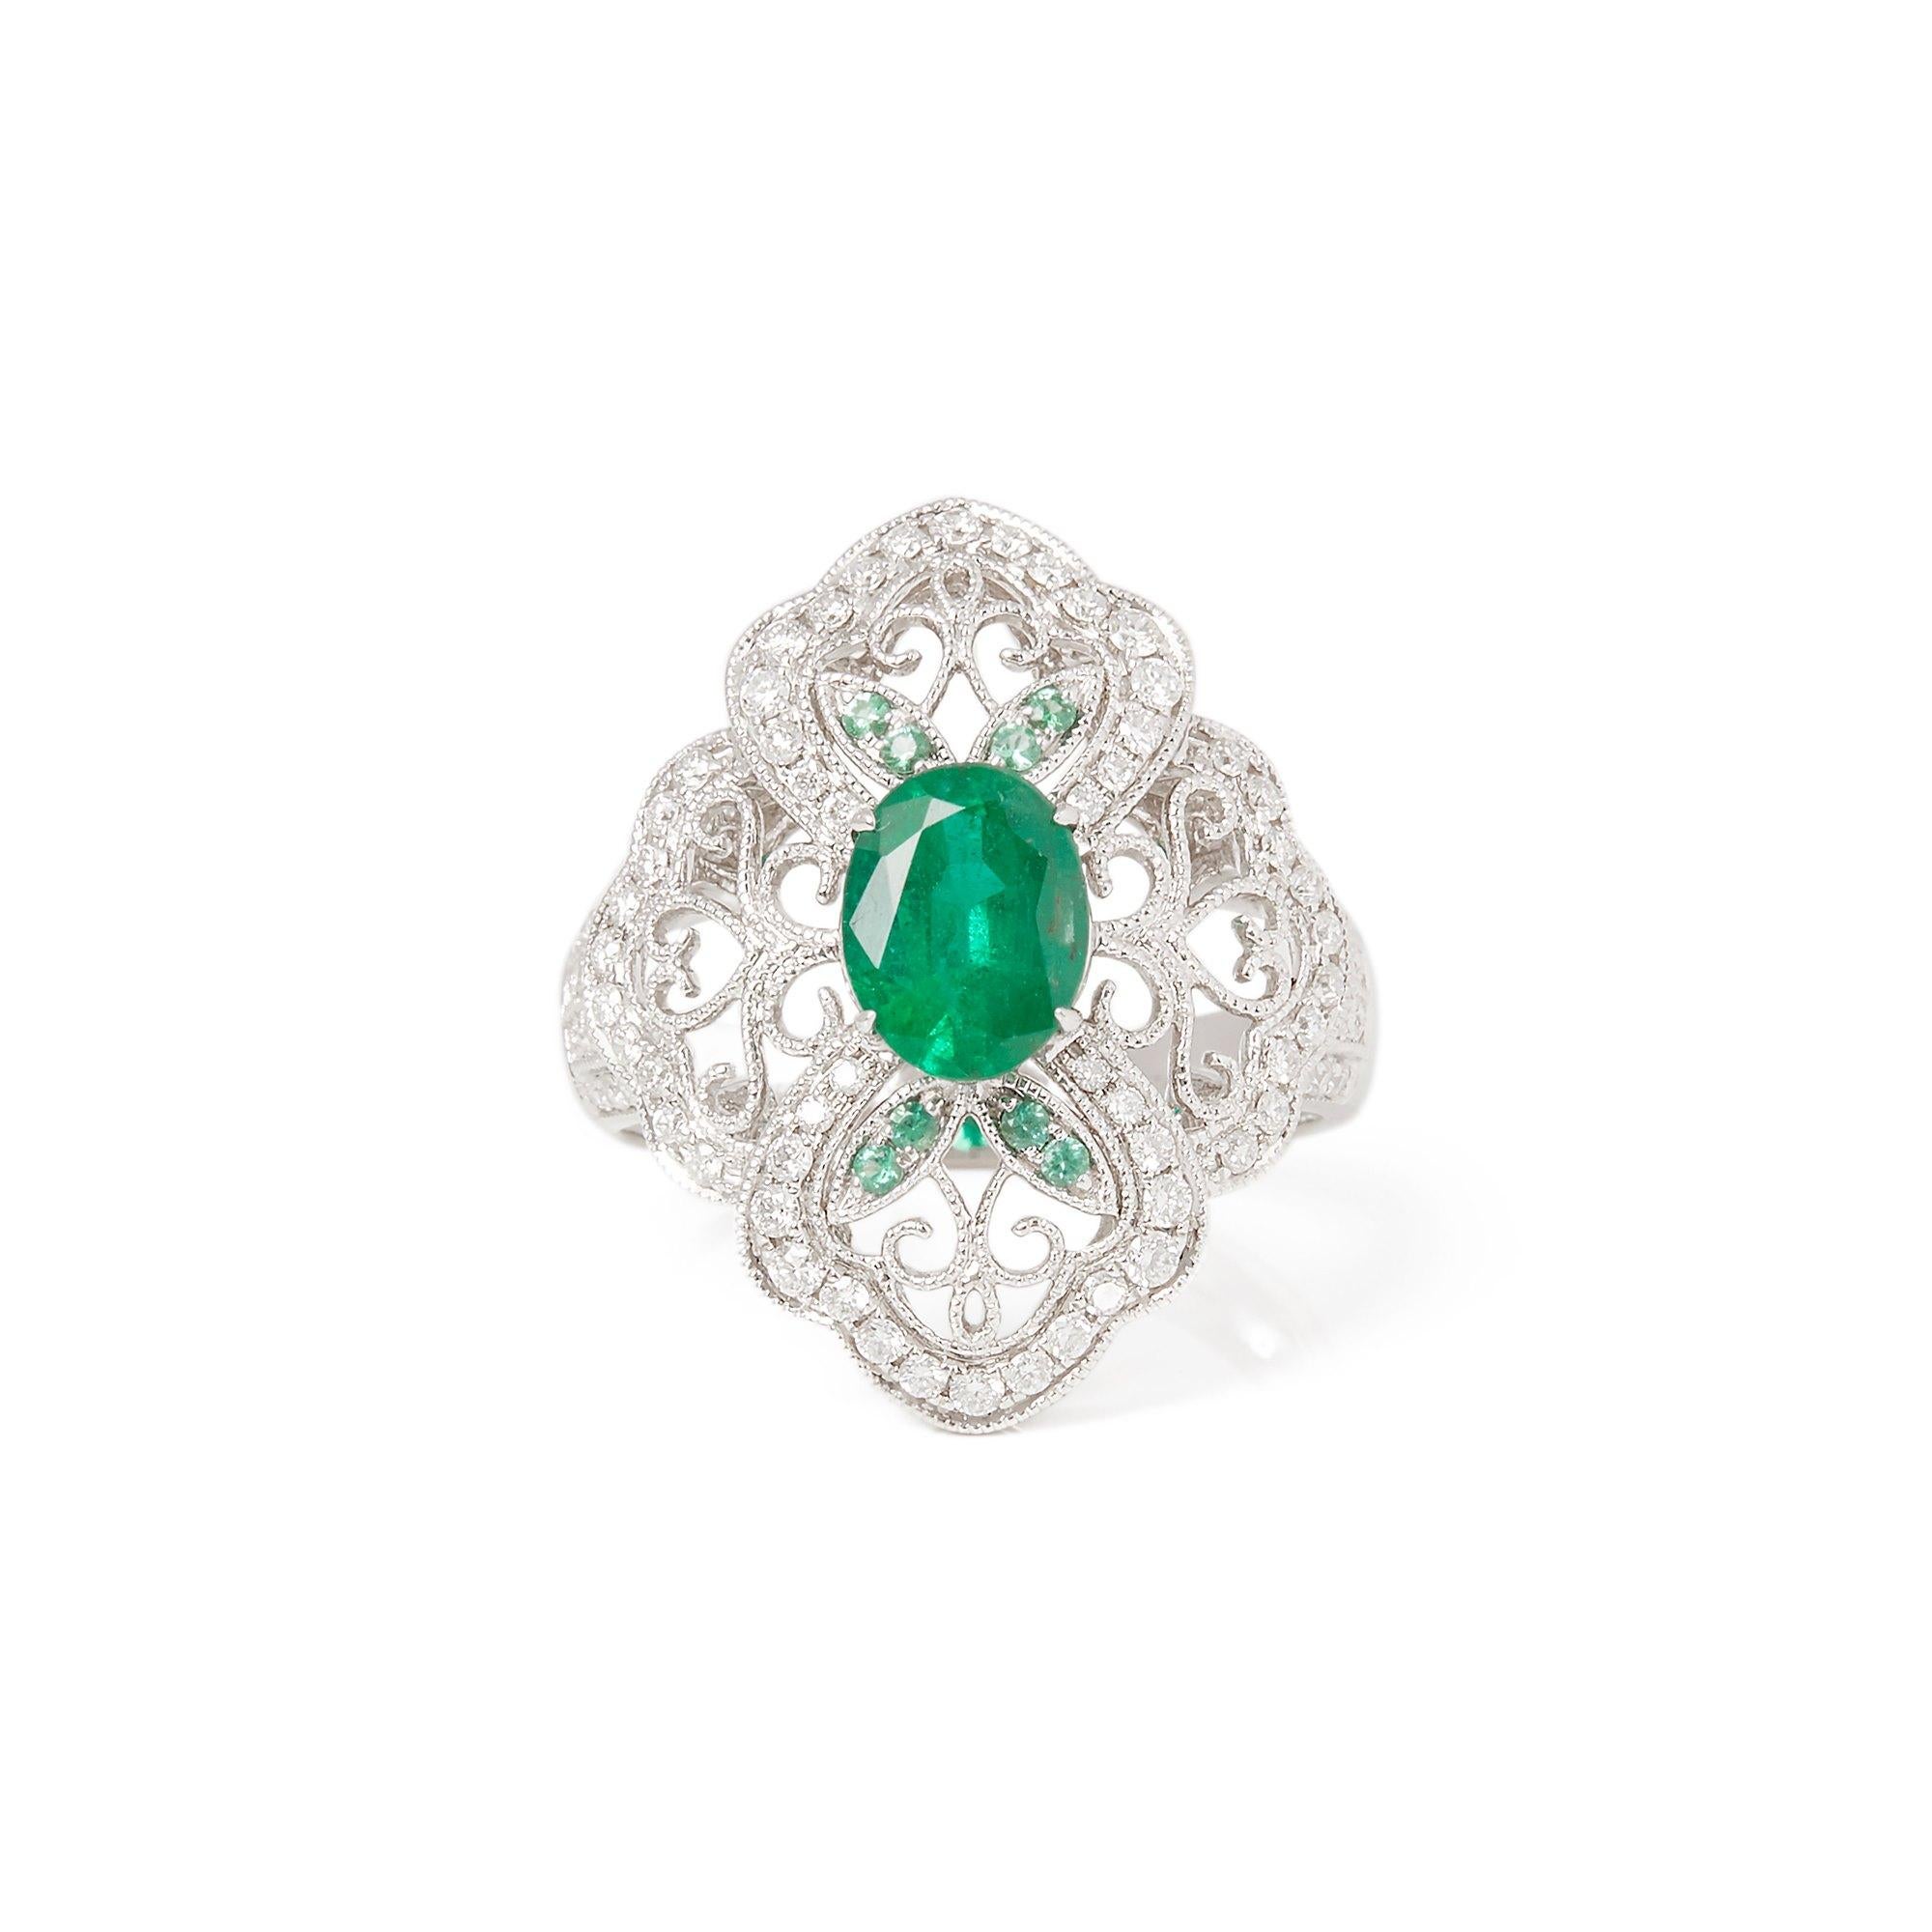 This ring designed by David Jerome is from his private collection and features one oval Cut Emerald totalling 1.72cts sourced from the chivor mine in Columbia. Set with round brilliant cut Diamonds totalling 0.63cts mounted in an 18k white gold